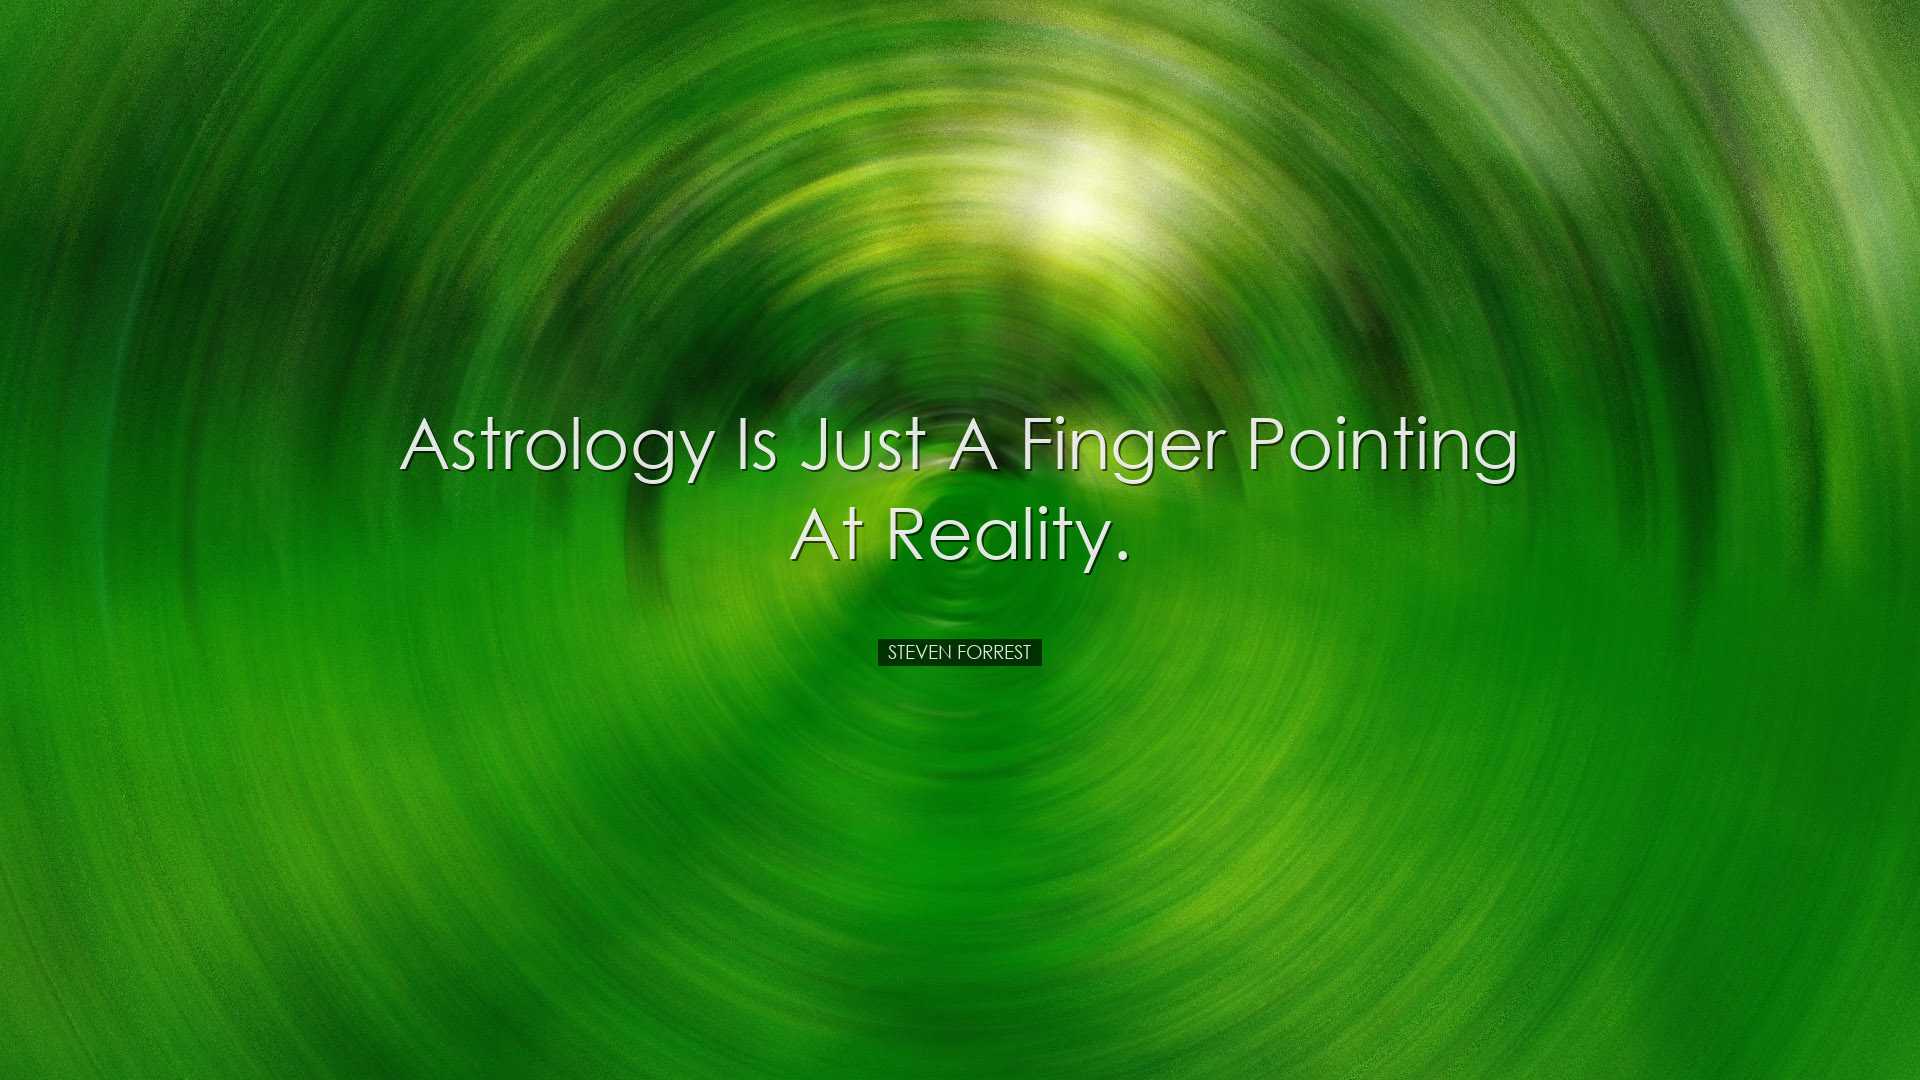 Astrology is just a finger pointing at reality. - Steven Forrest